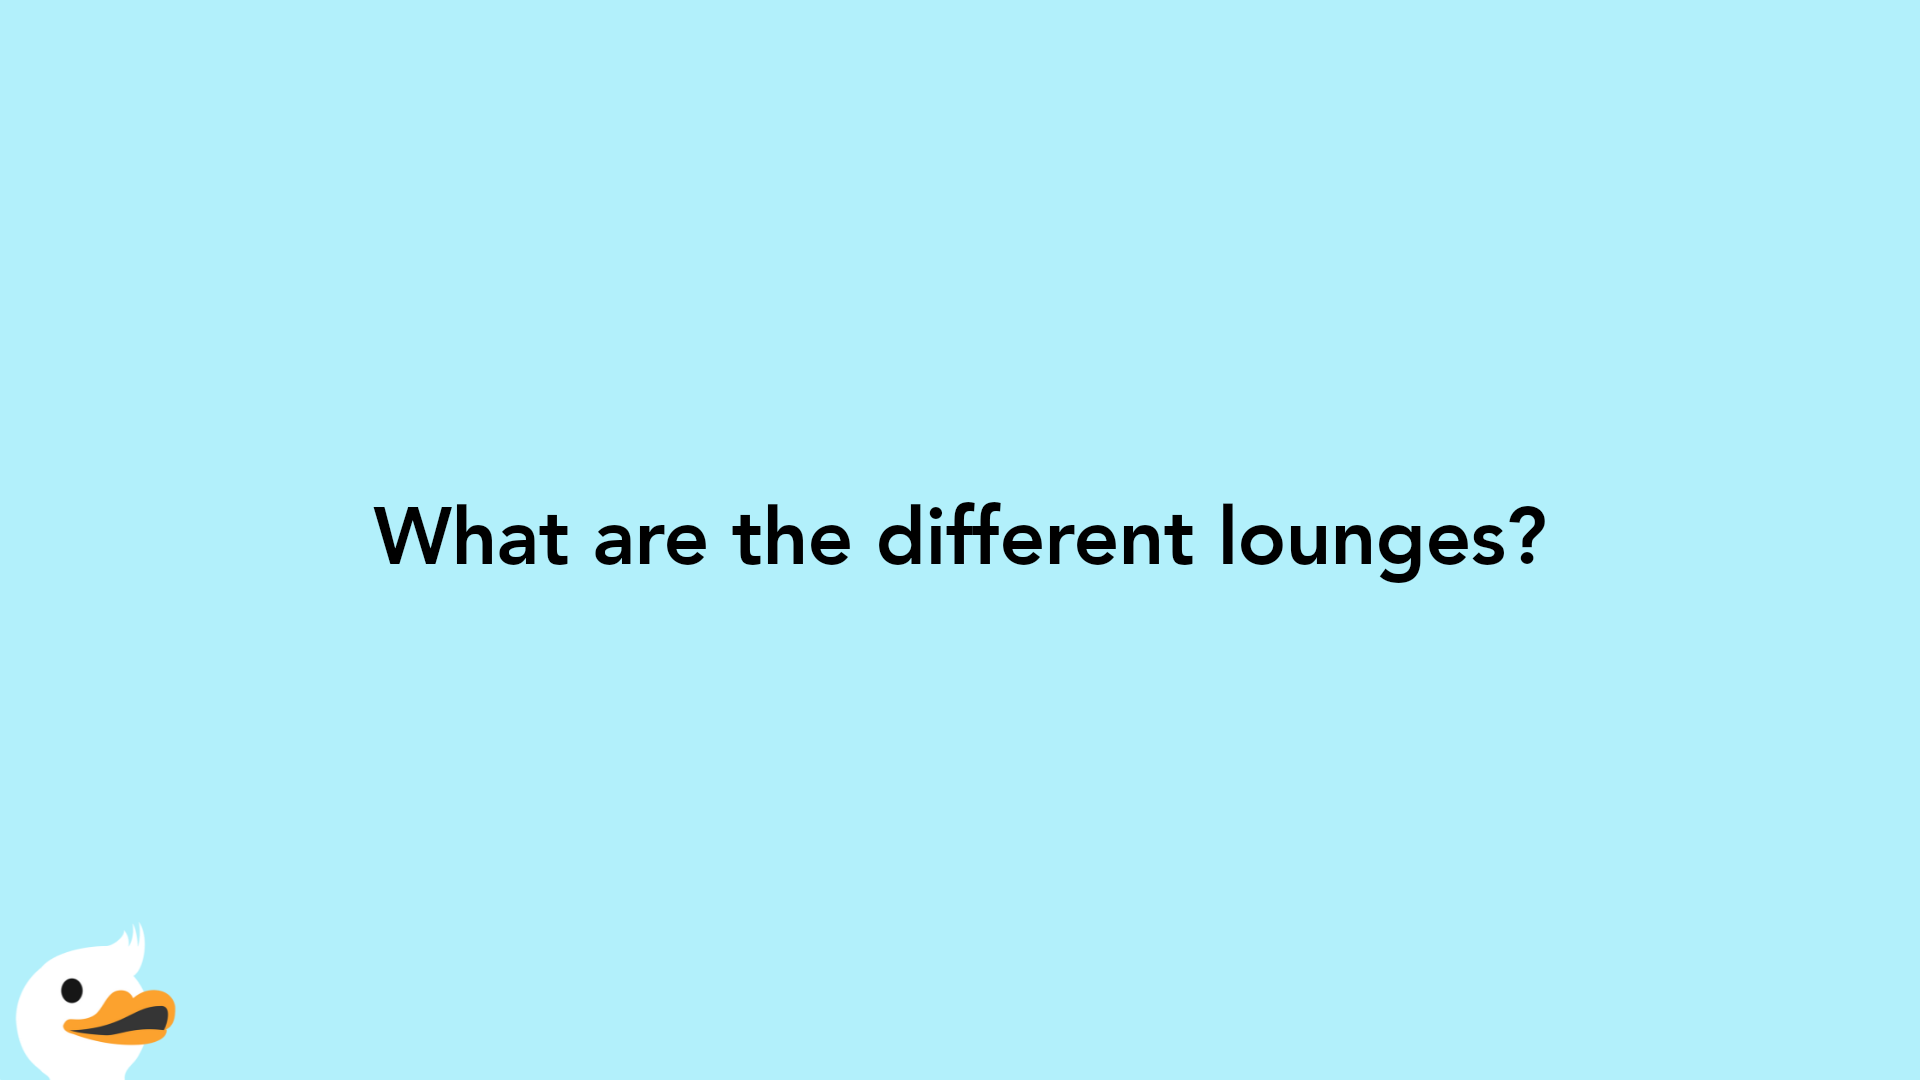 What are the different lounges?